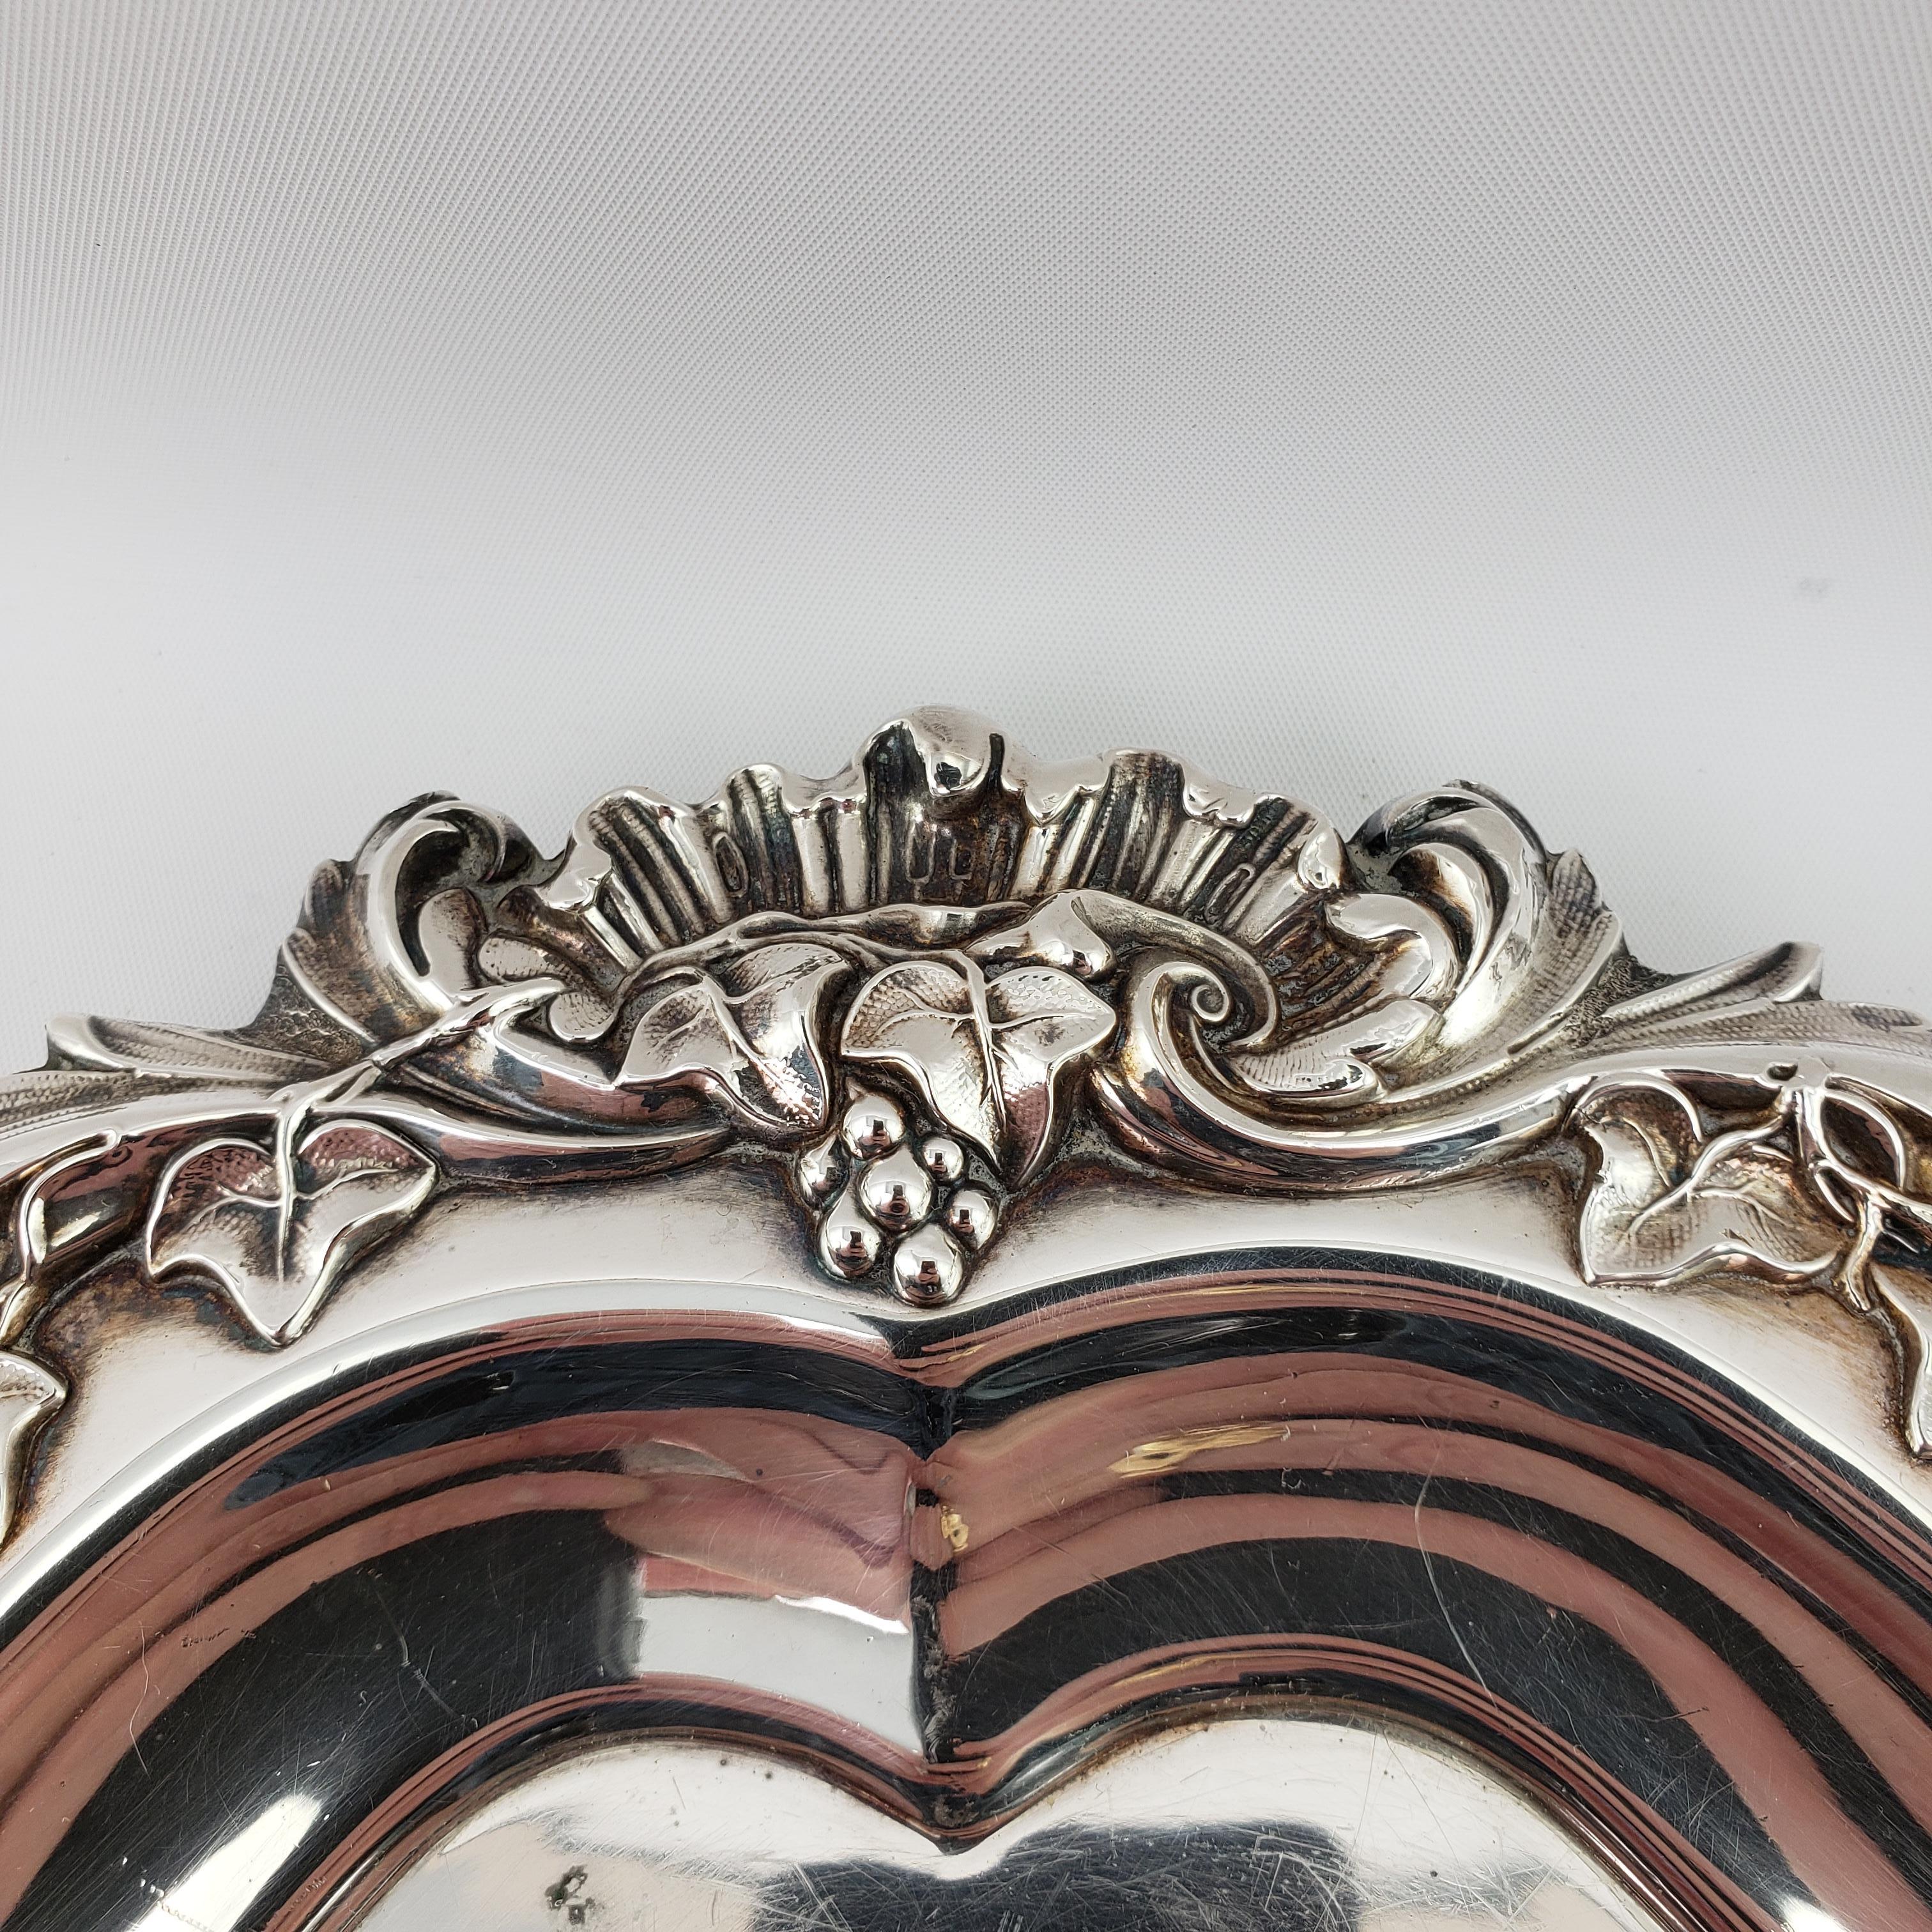 Ornate silverplated serving tray featuring dual handles, a hand chased center and a raised border featuring scrolling floral and foliate designs. This is a fairly substantial tray which is quite large and heavy.